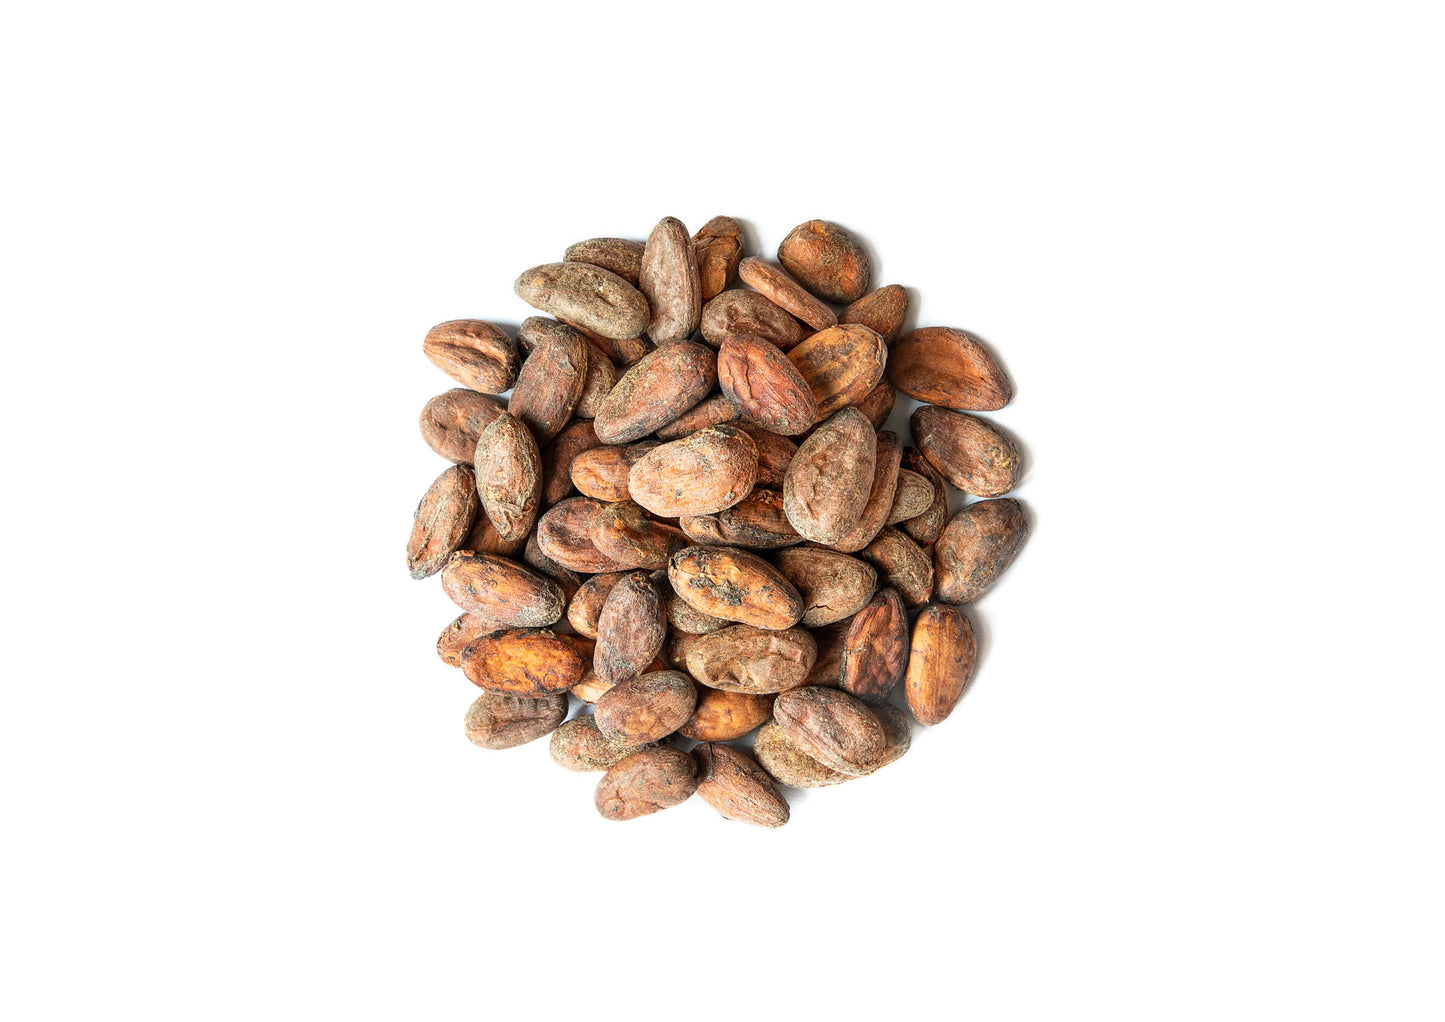 Organic Cacao Beans